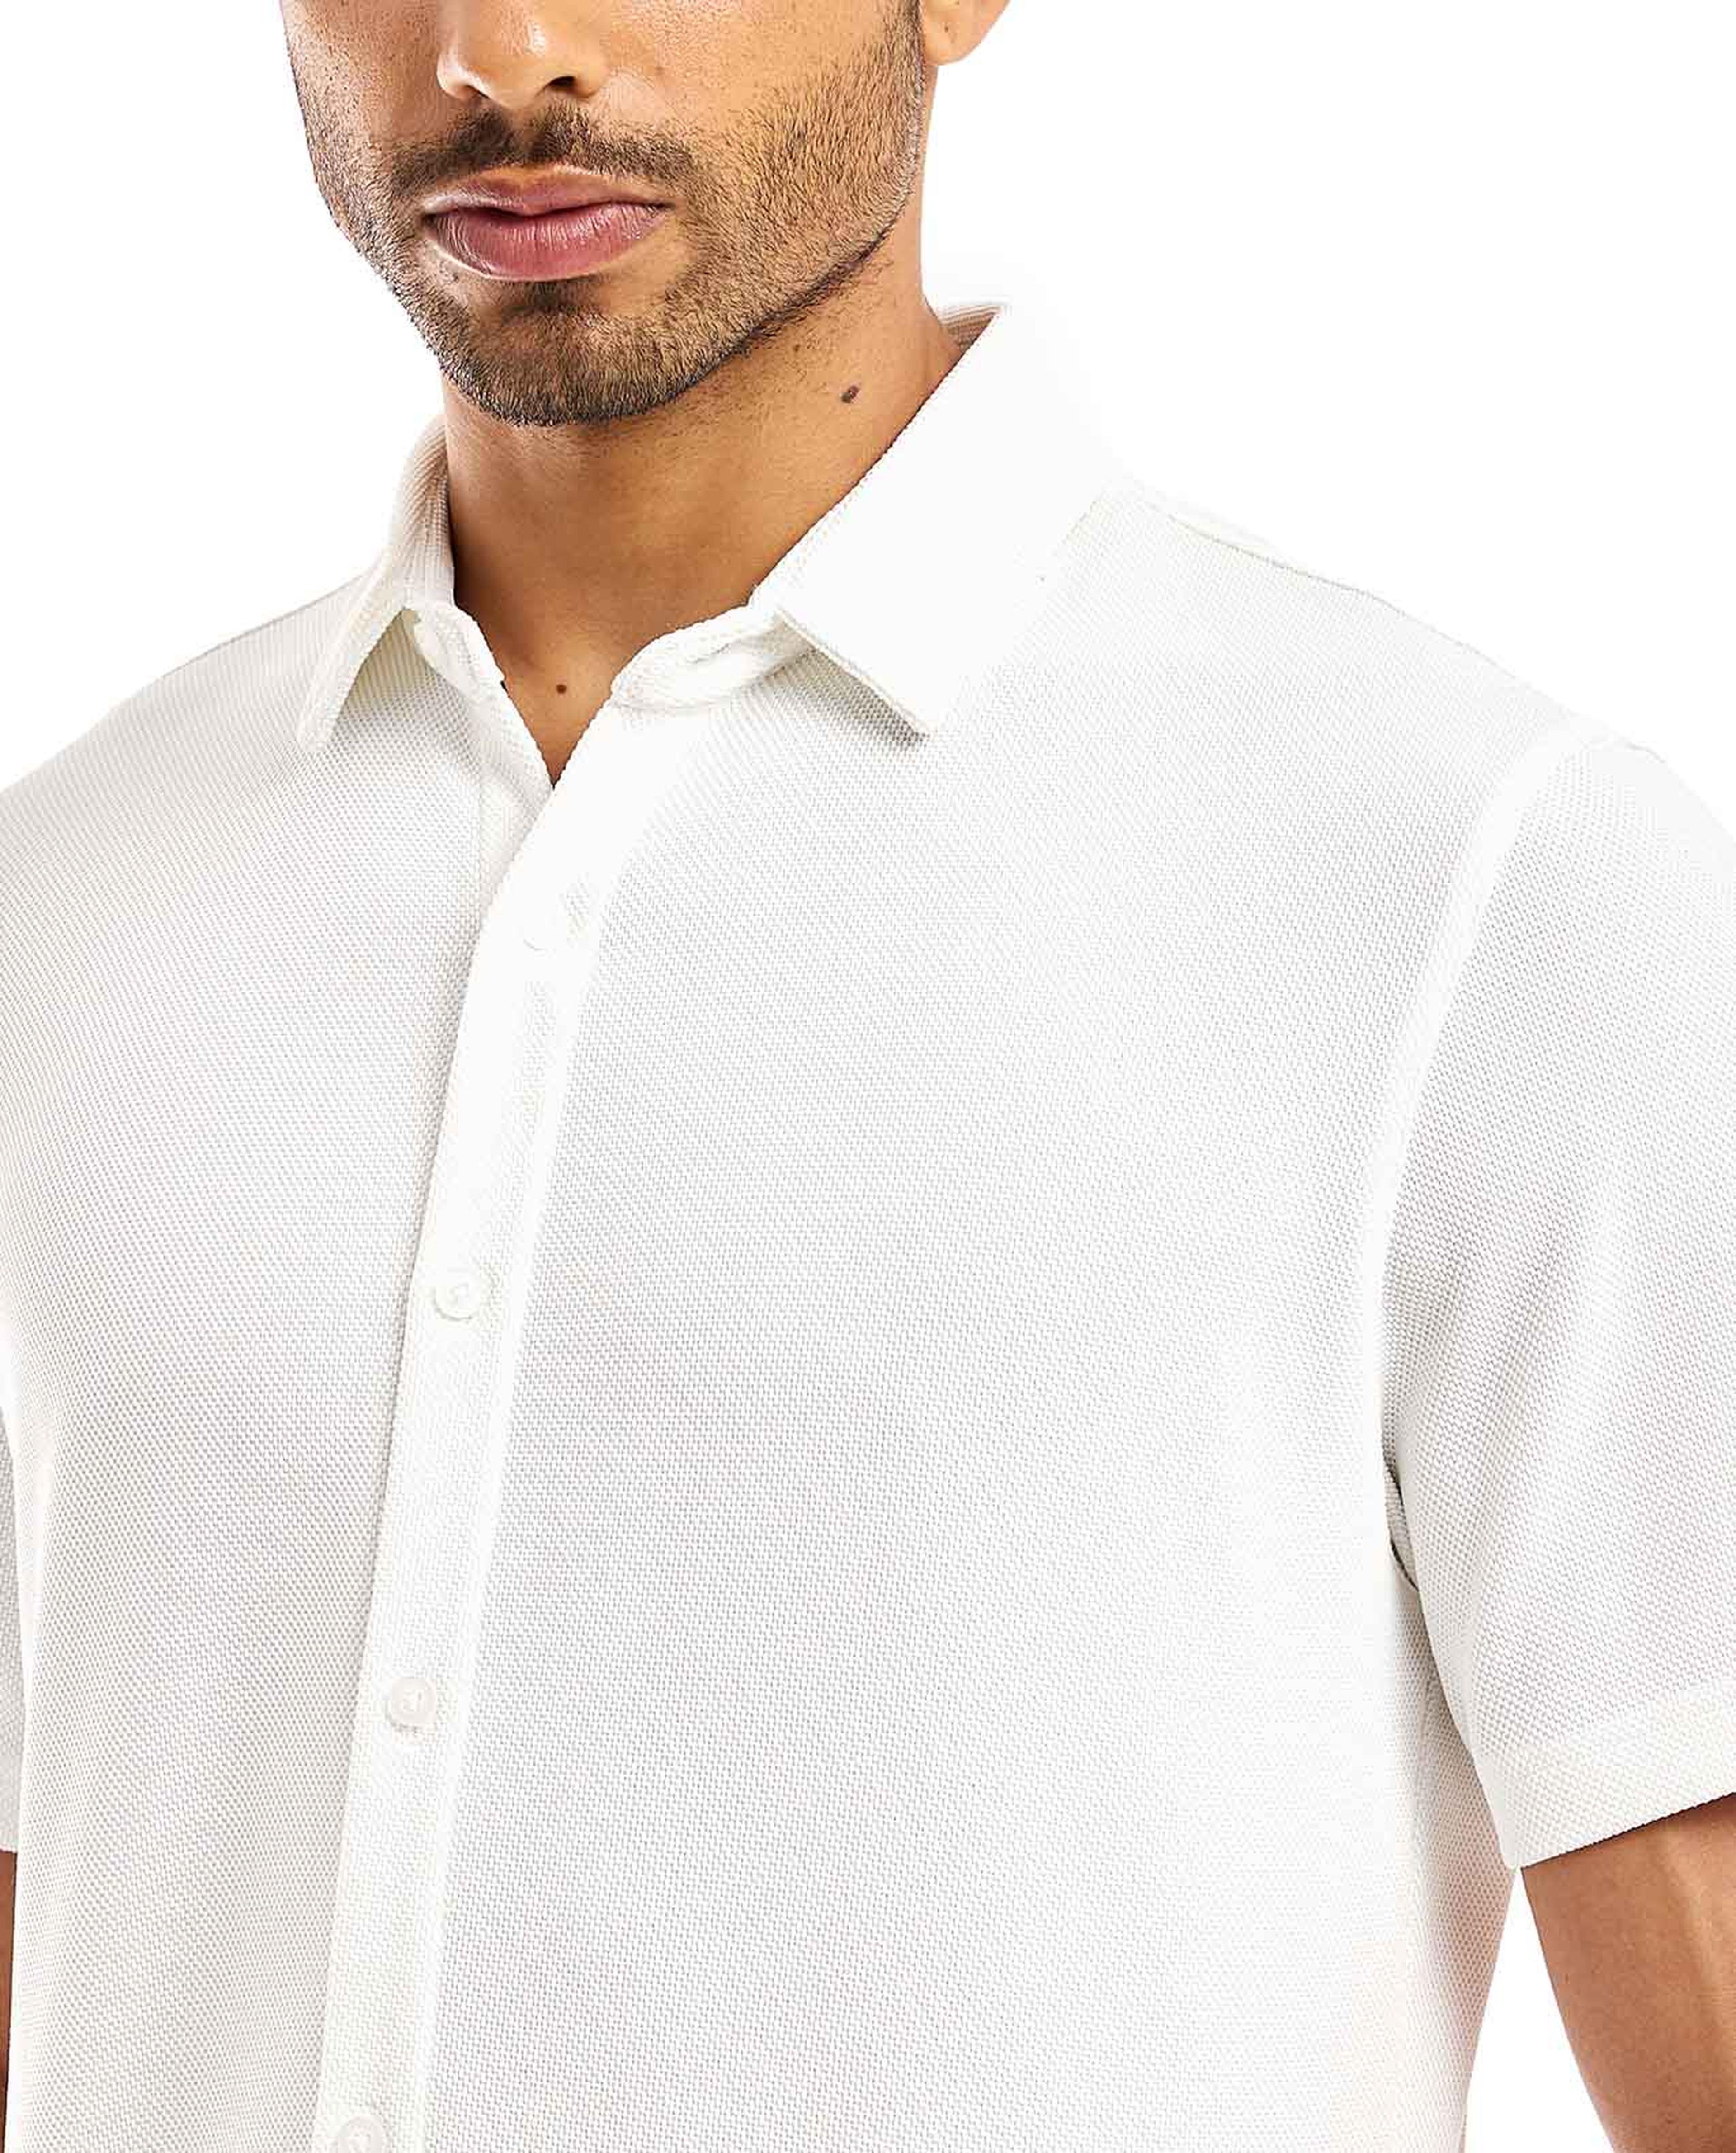 Solid Knitted Shirt with Classic Collar and Short Sleeves